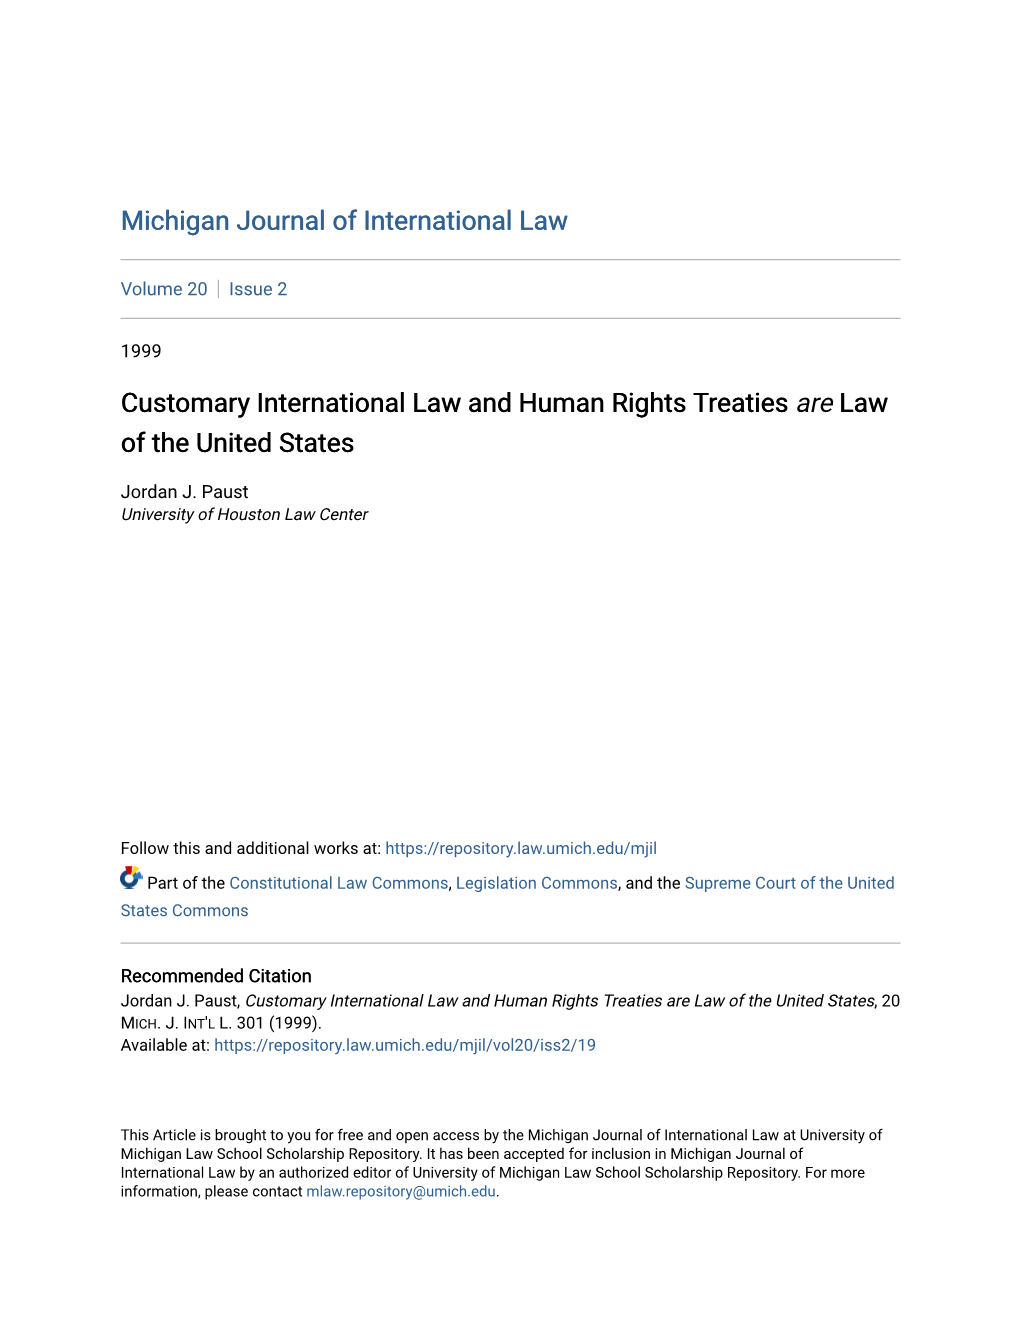 Customary International Law and Human Rights Treaties Are Law of the United States